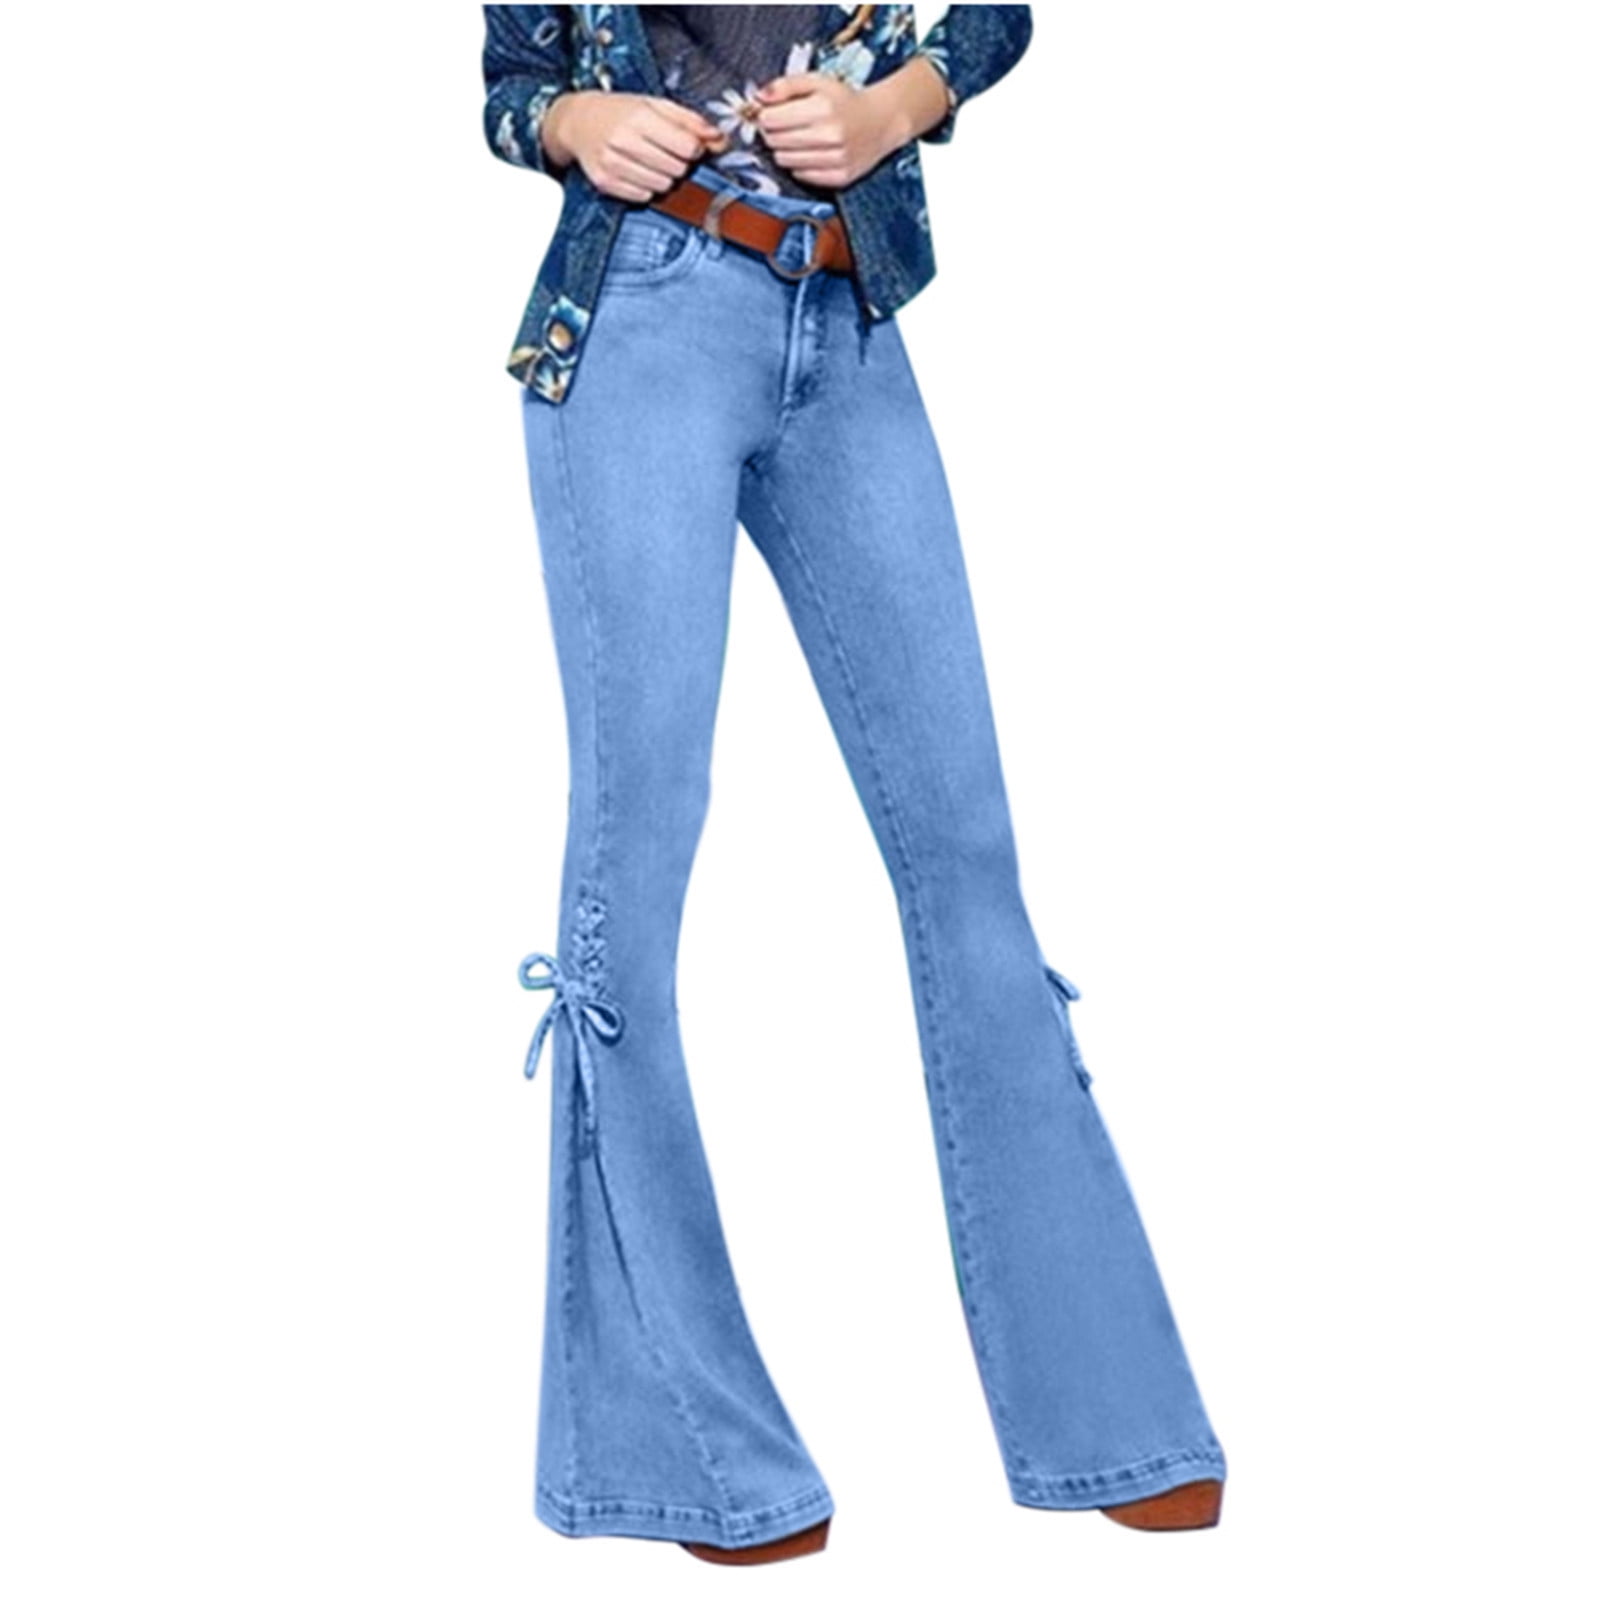 OMBMUT Women's Lace Up Denim Pants High Waist Bodycon Back Tie Up Skinny Jeans  Drawstring Bandage Cut Out Stretch Trousers Blue : Amazon.ca: Clothing,  Shoes & Accessories